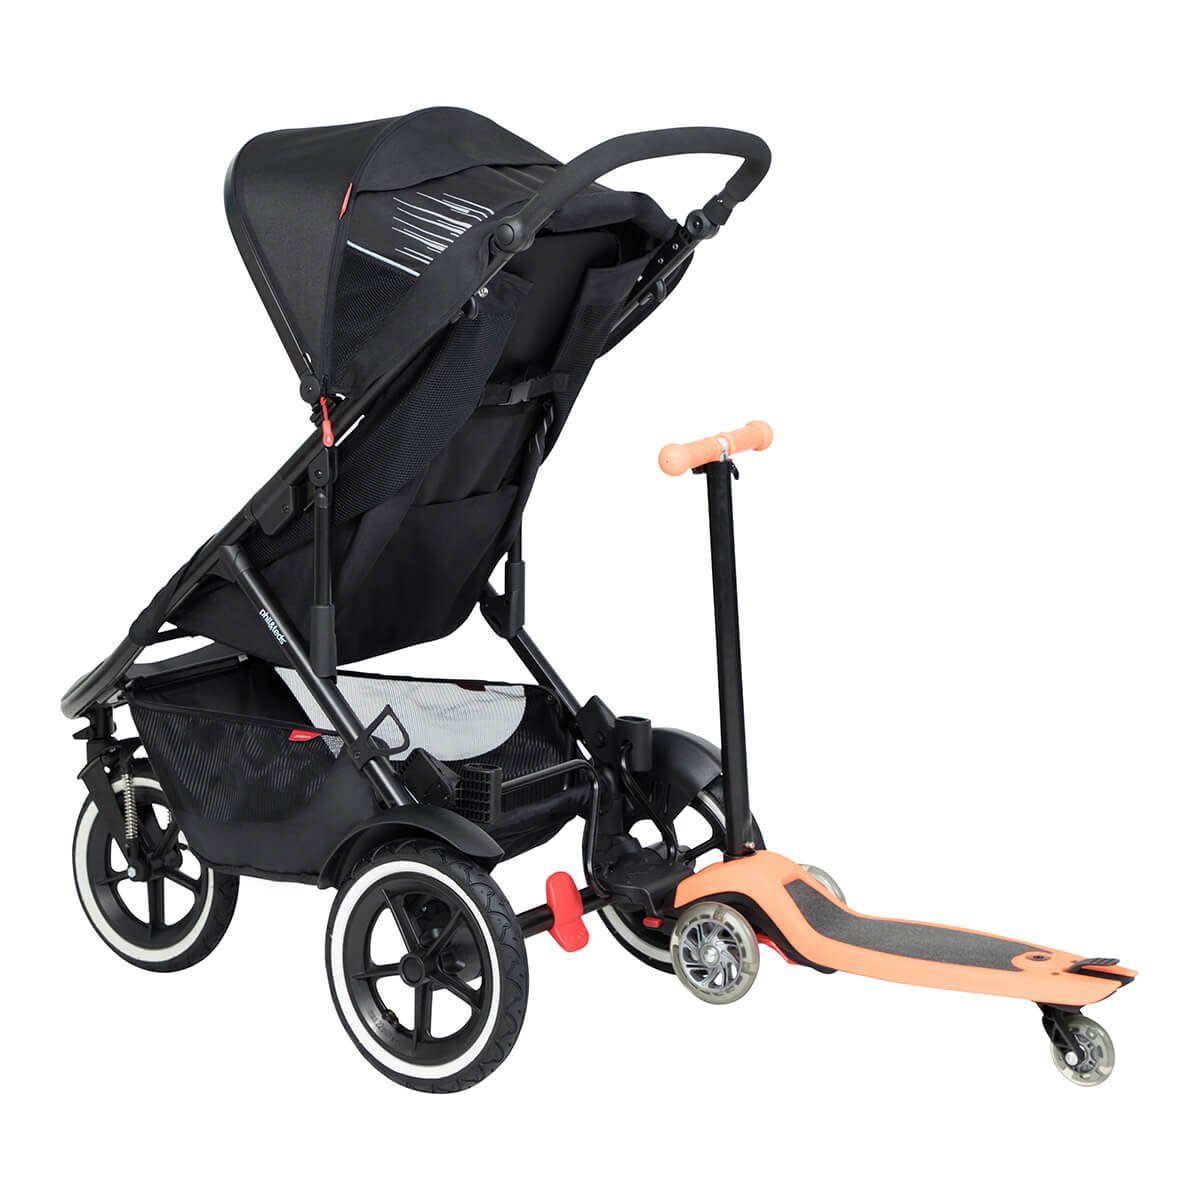 https://cdn.accentuate.io/7749831459010/19466204315842/philteds-sport-buggy-with-freerider-stroller-board-in-rear-v1700693415071.jpg?1200x1200